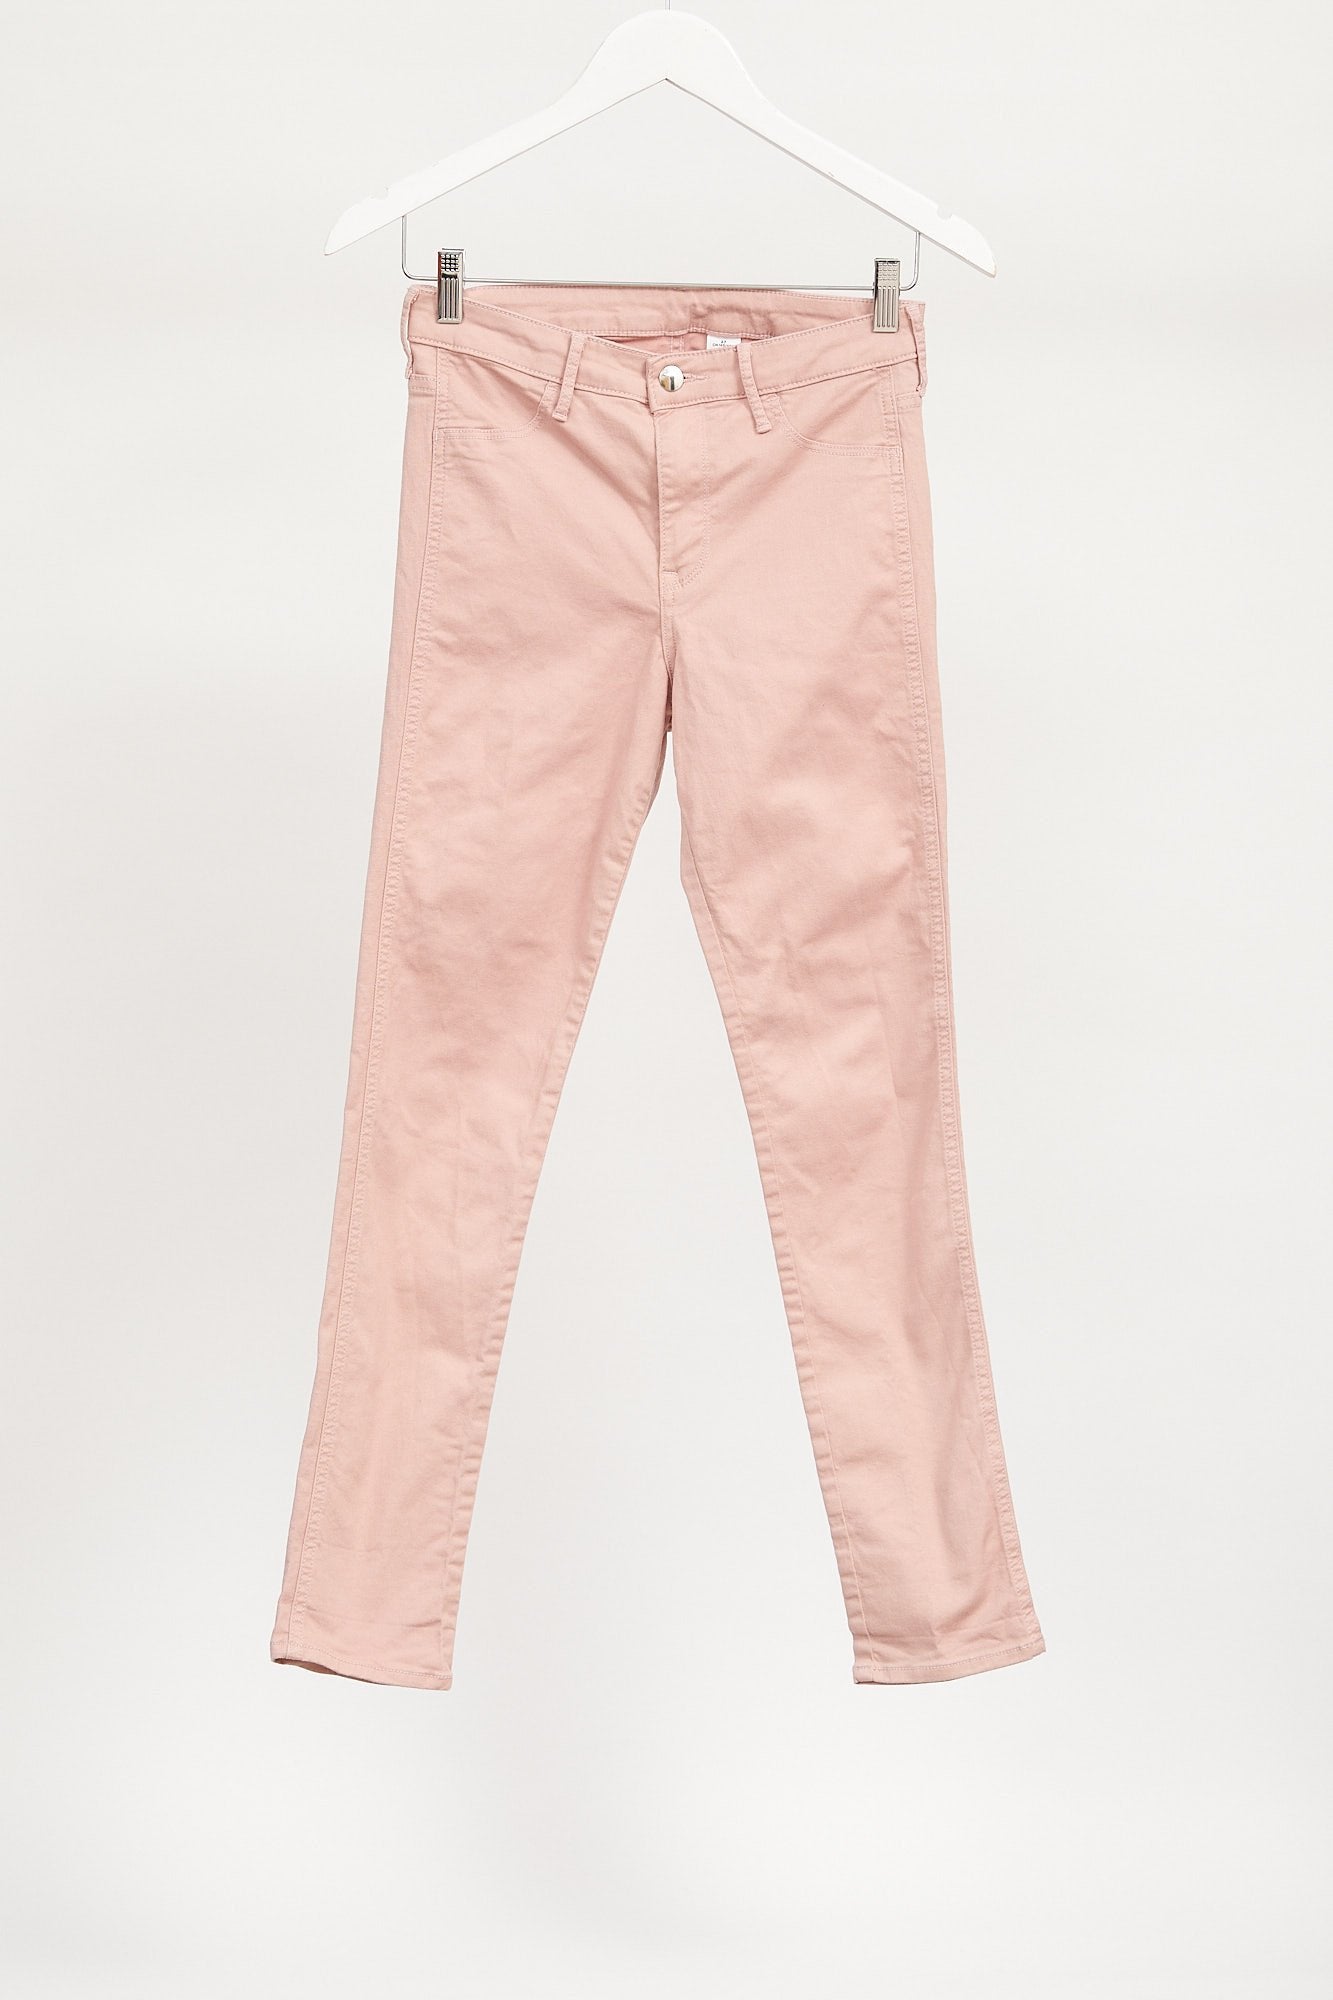 Womens Pink Jeans: Size Small